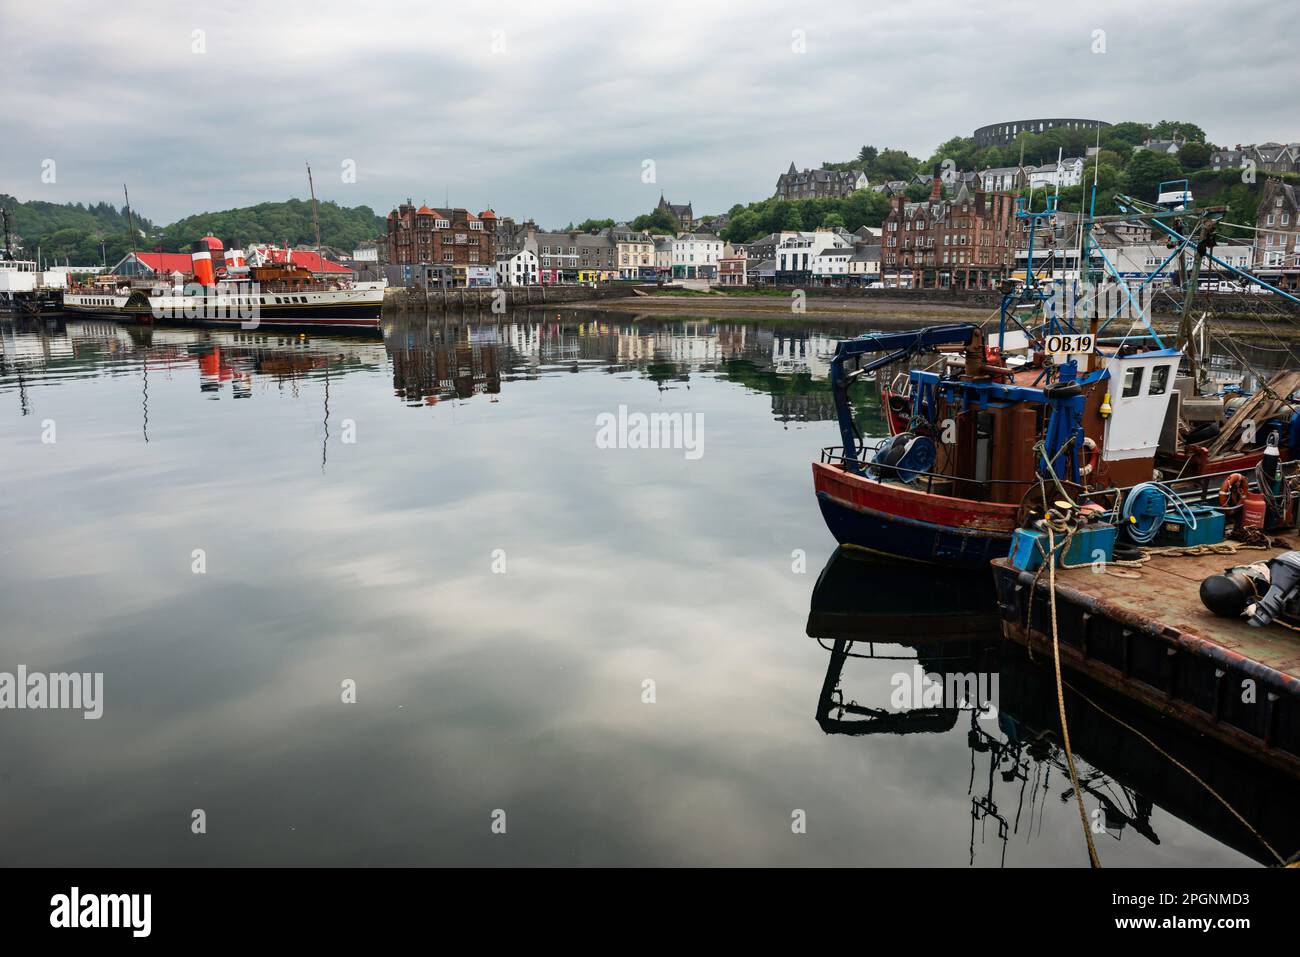 Seagoing Paddle Steamer Waverley moored in Oban Harbour with town and fishing boats Stock Photo